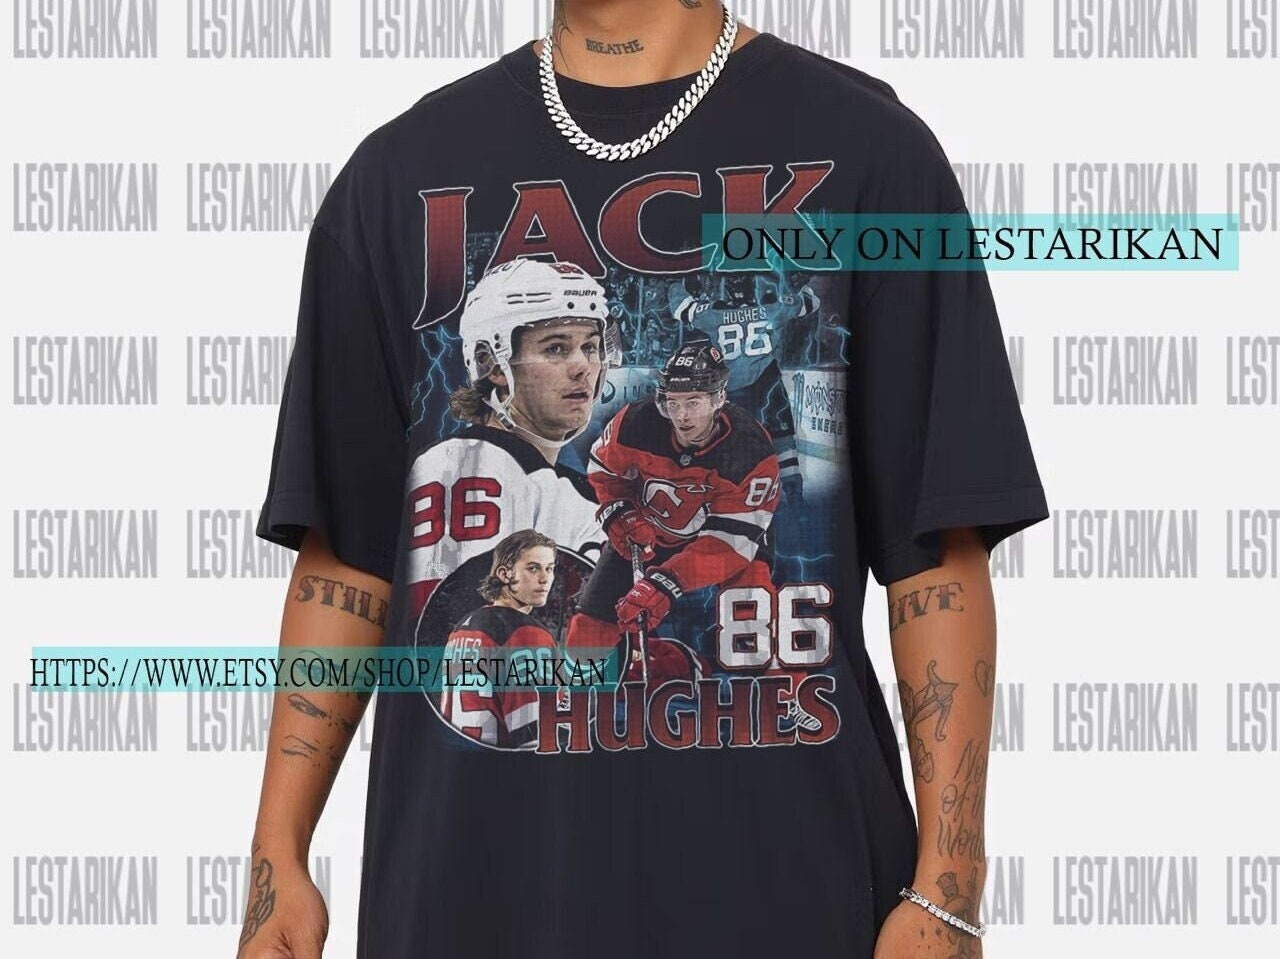 Official Jack hughes hockey nhl vintage T-shirt, hoodie, tank top, sweater  and long sleeve t-shirt